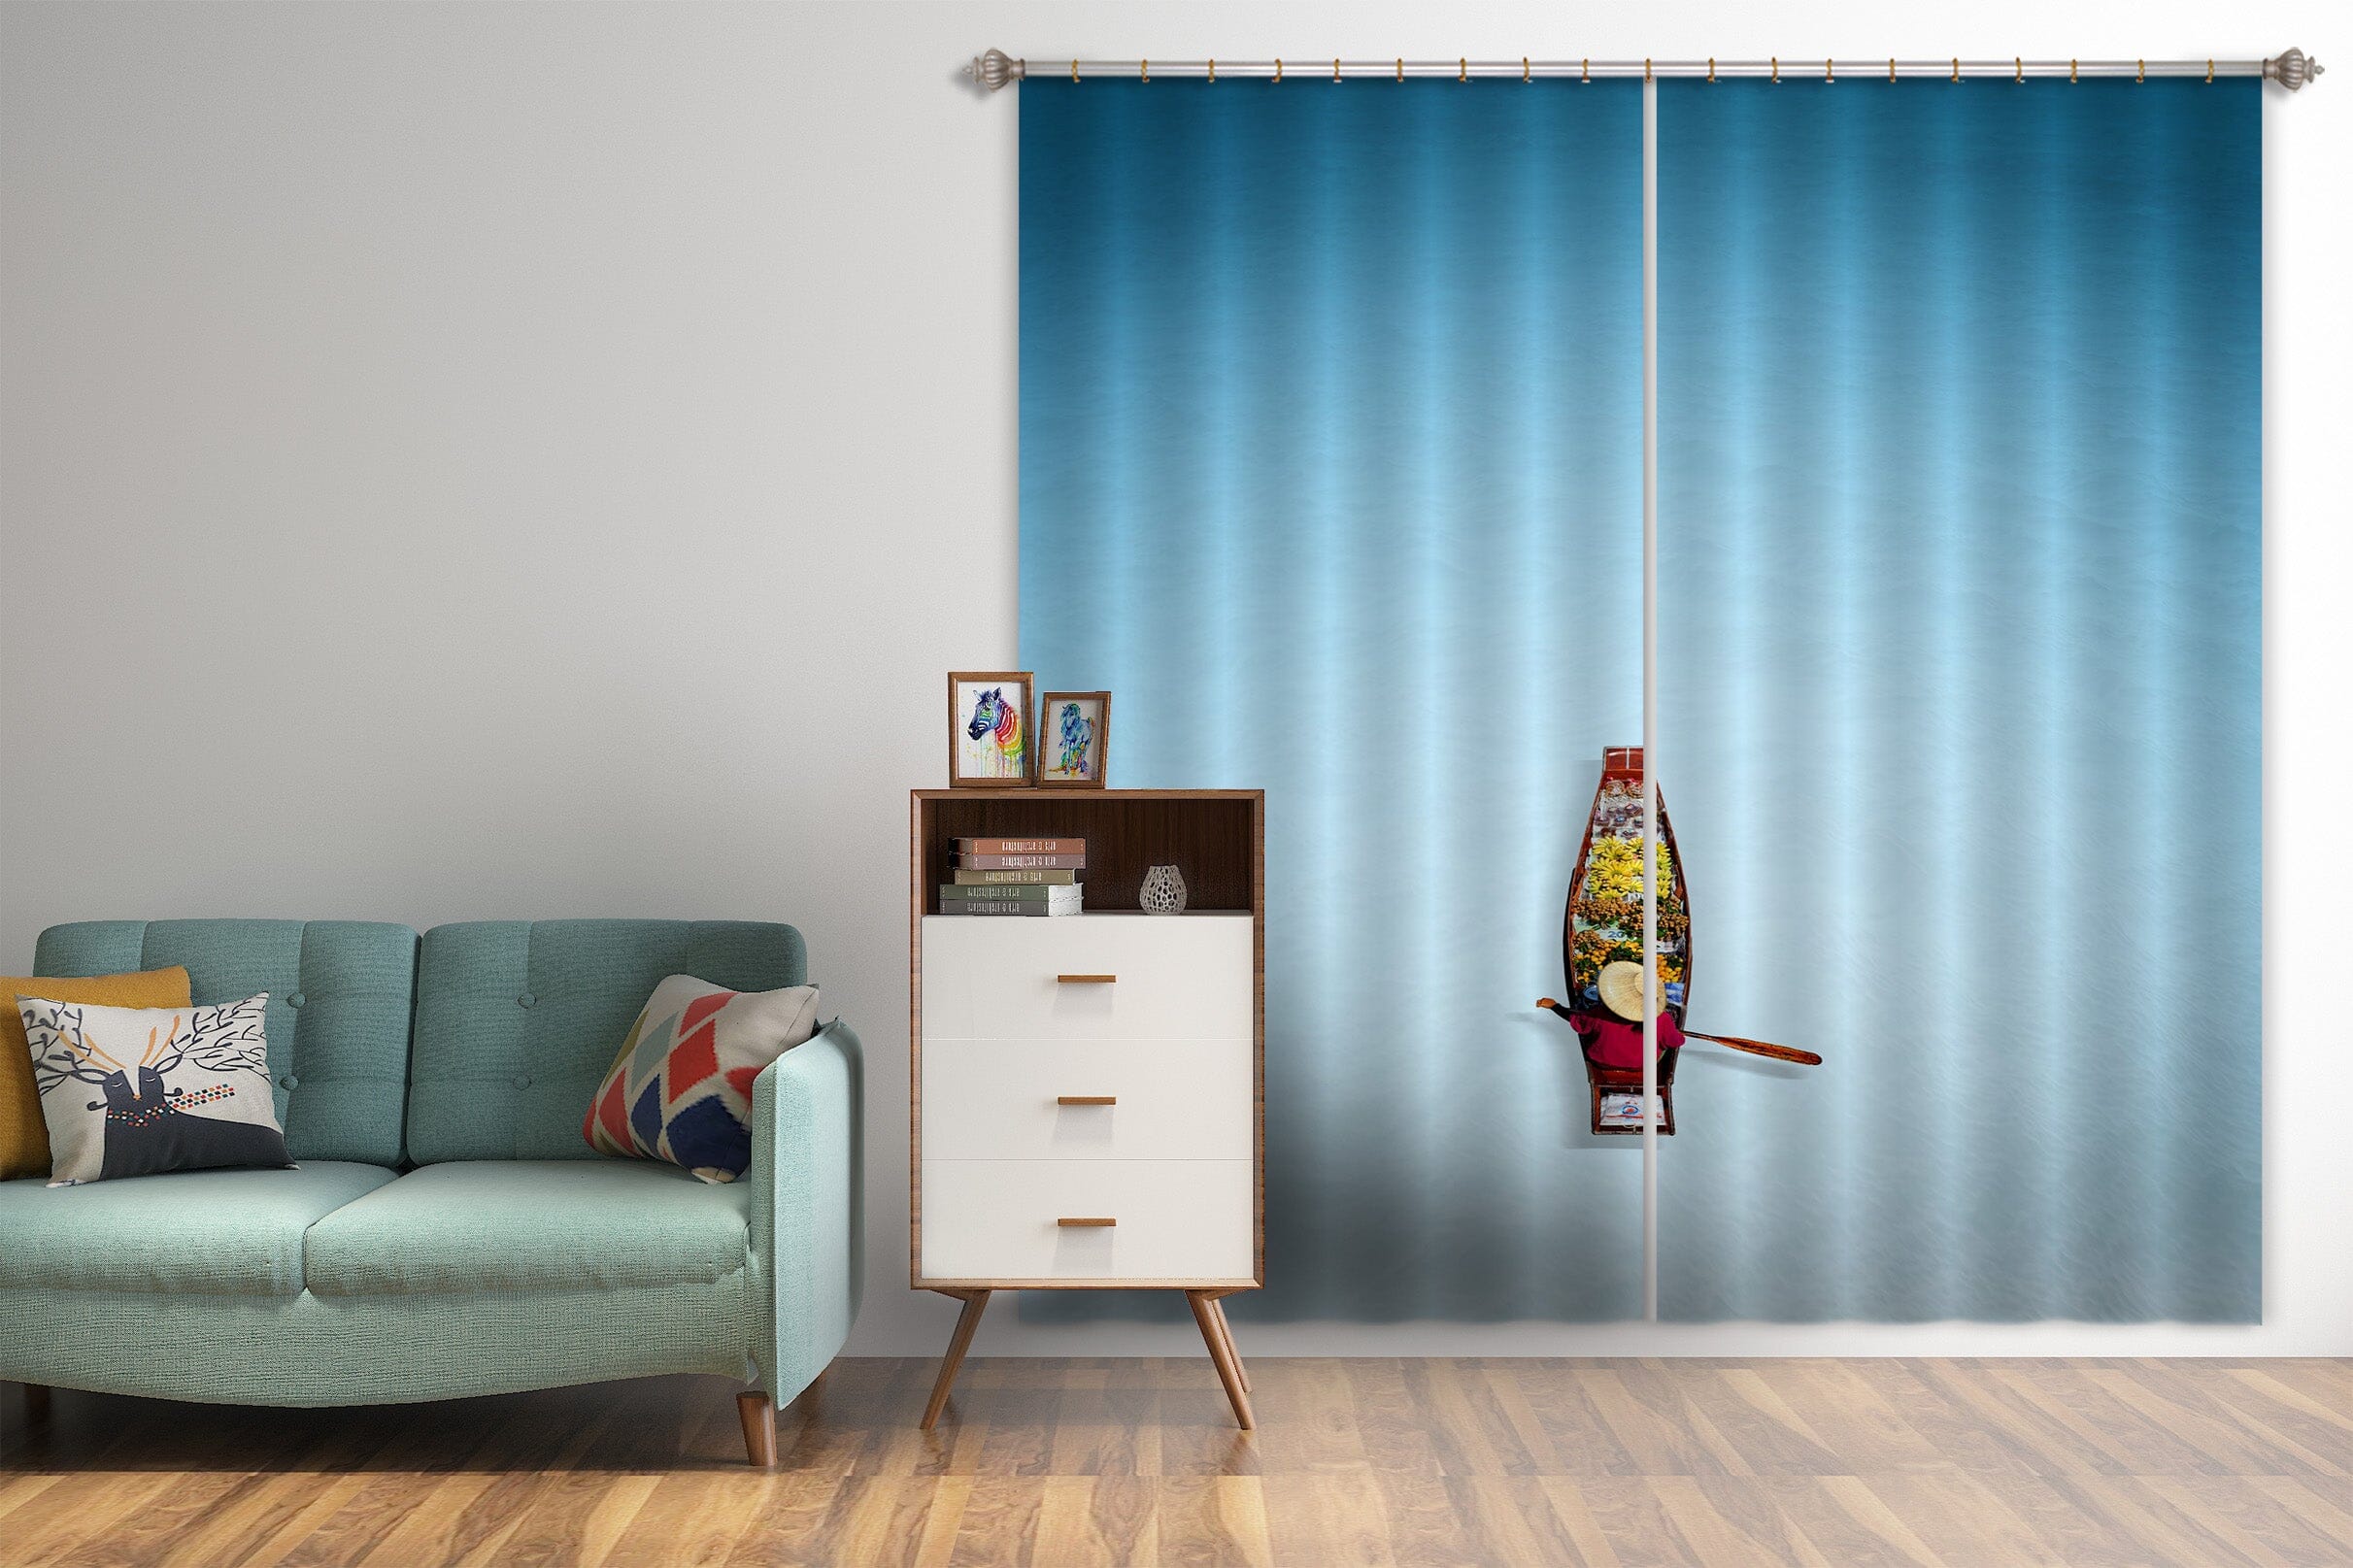 3D Boat In Water 074 Marco Carmassi Curtain Curtains Drapes Curtains AJ Creativity Home 